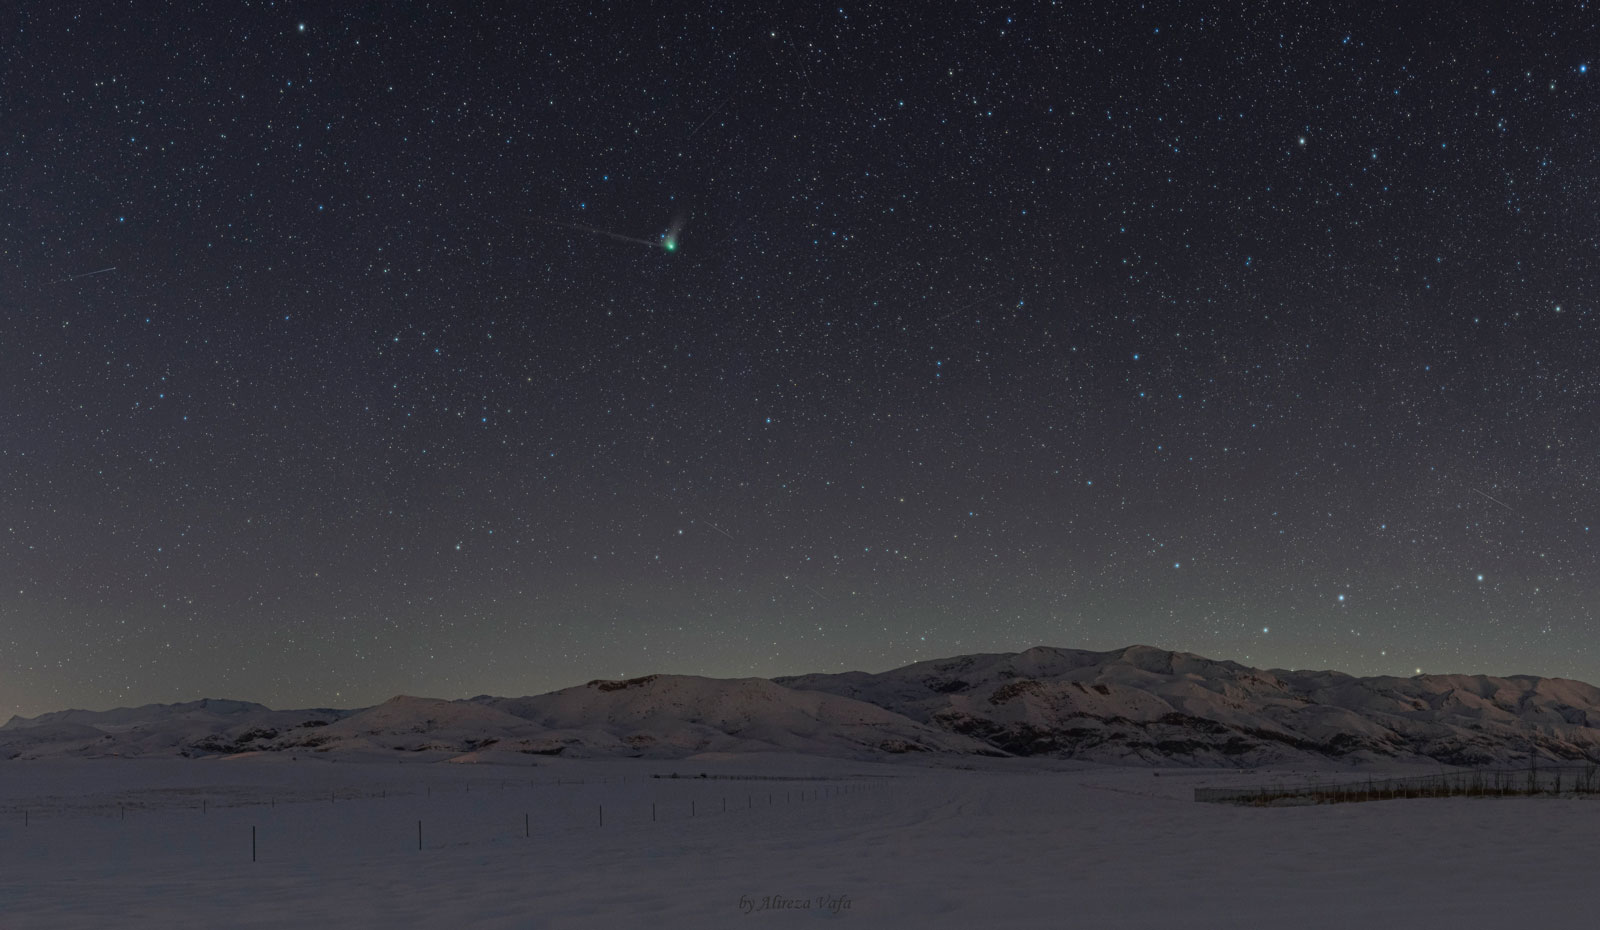 On February 2nd 2023 comet C/2022 E3 (ZTF) was at its closest approach to us. The comet resembled a colorless faint ball seen with the naked eye but it shows its structures beautifully to the camera. Two fast lenses utilized to capture this image: one of which is Tokina opera 50mm F1.4 FF on Nikon D610 body was used to capture the entire sky and foreground on a panoramic view attached on the Kenko SKYMEMO S star tracker for comet details. 